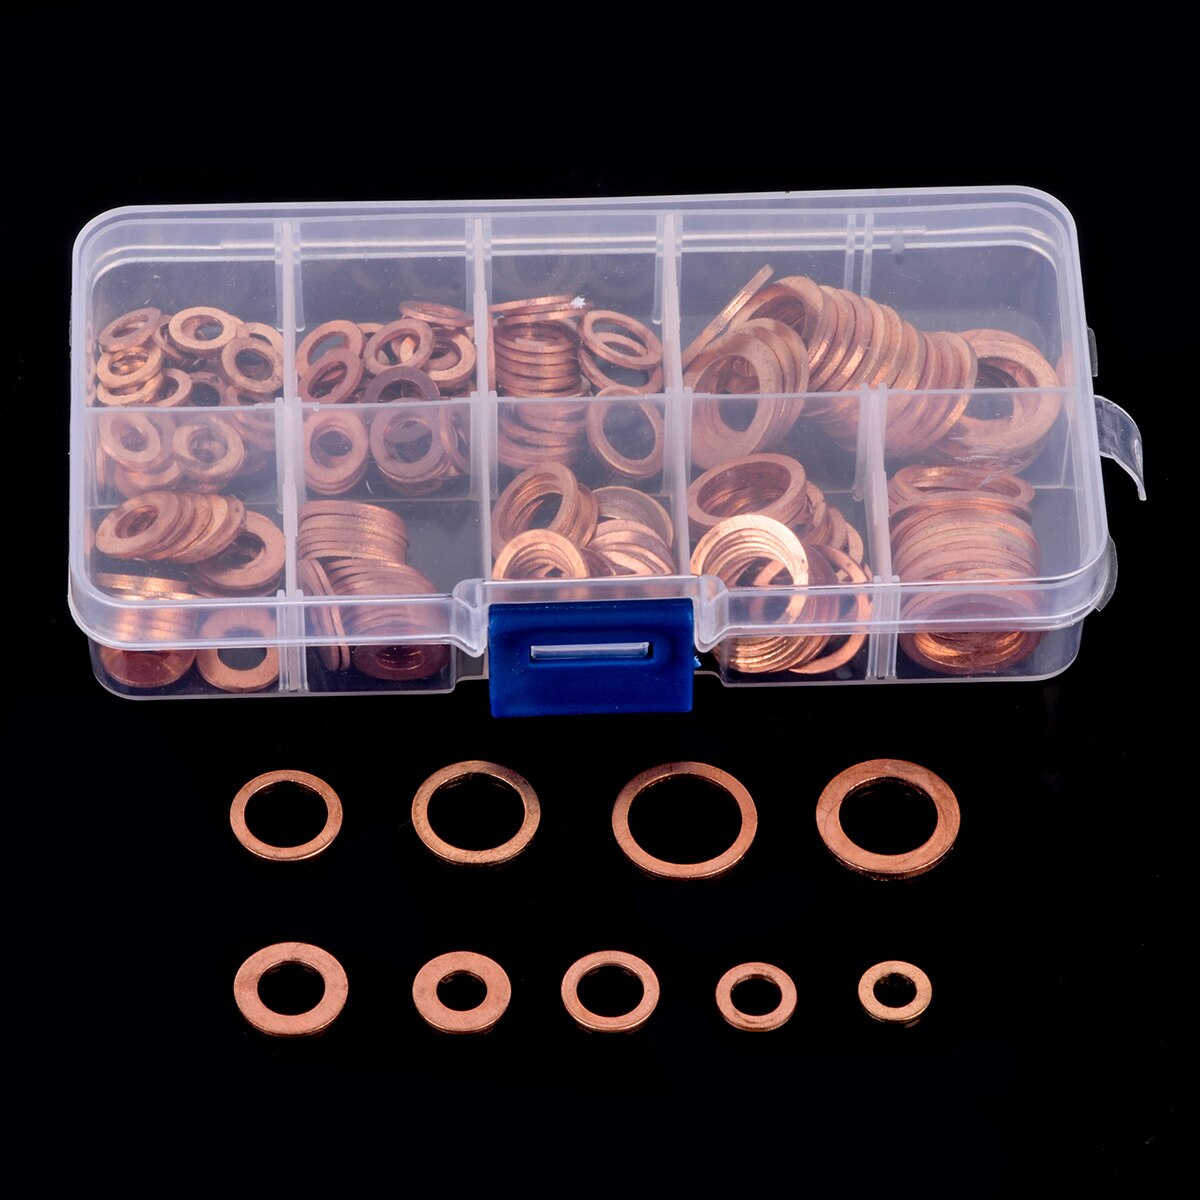 200pcs M5-M14 Professional Assorted Copper Washer Gasket Set Flat Ring Seal Assortment Kit with Box For Hardware Accessories